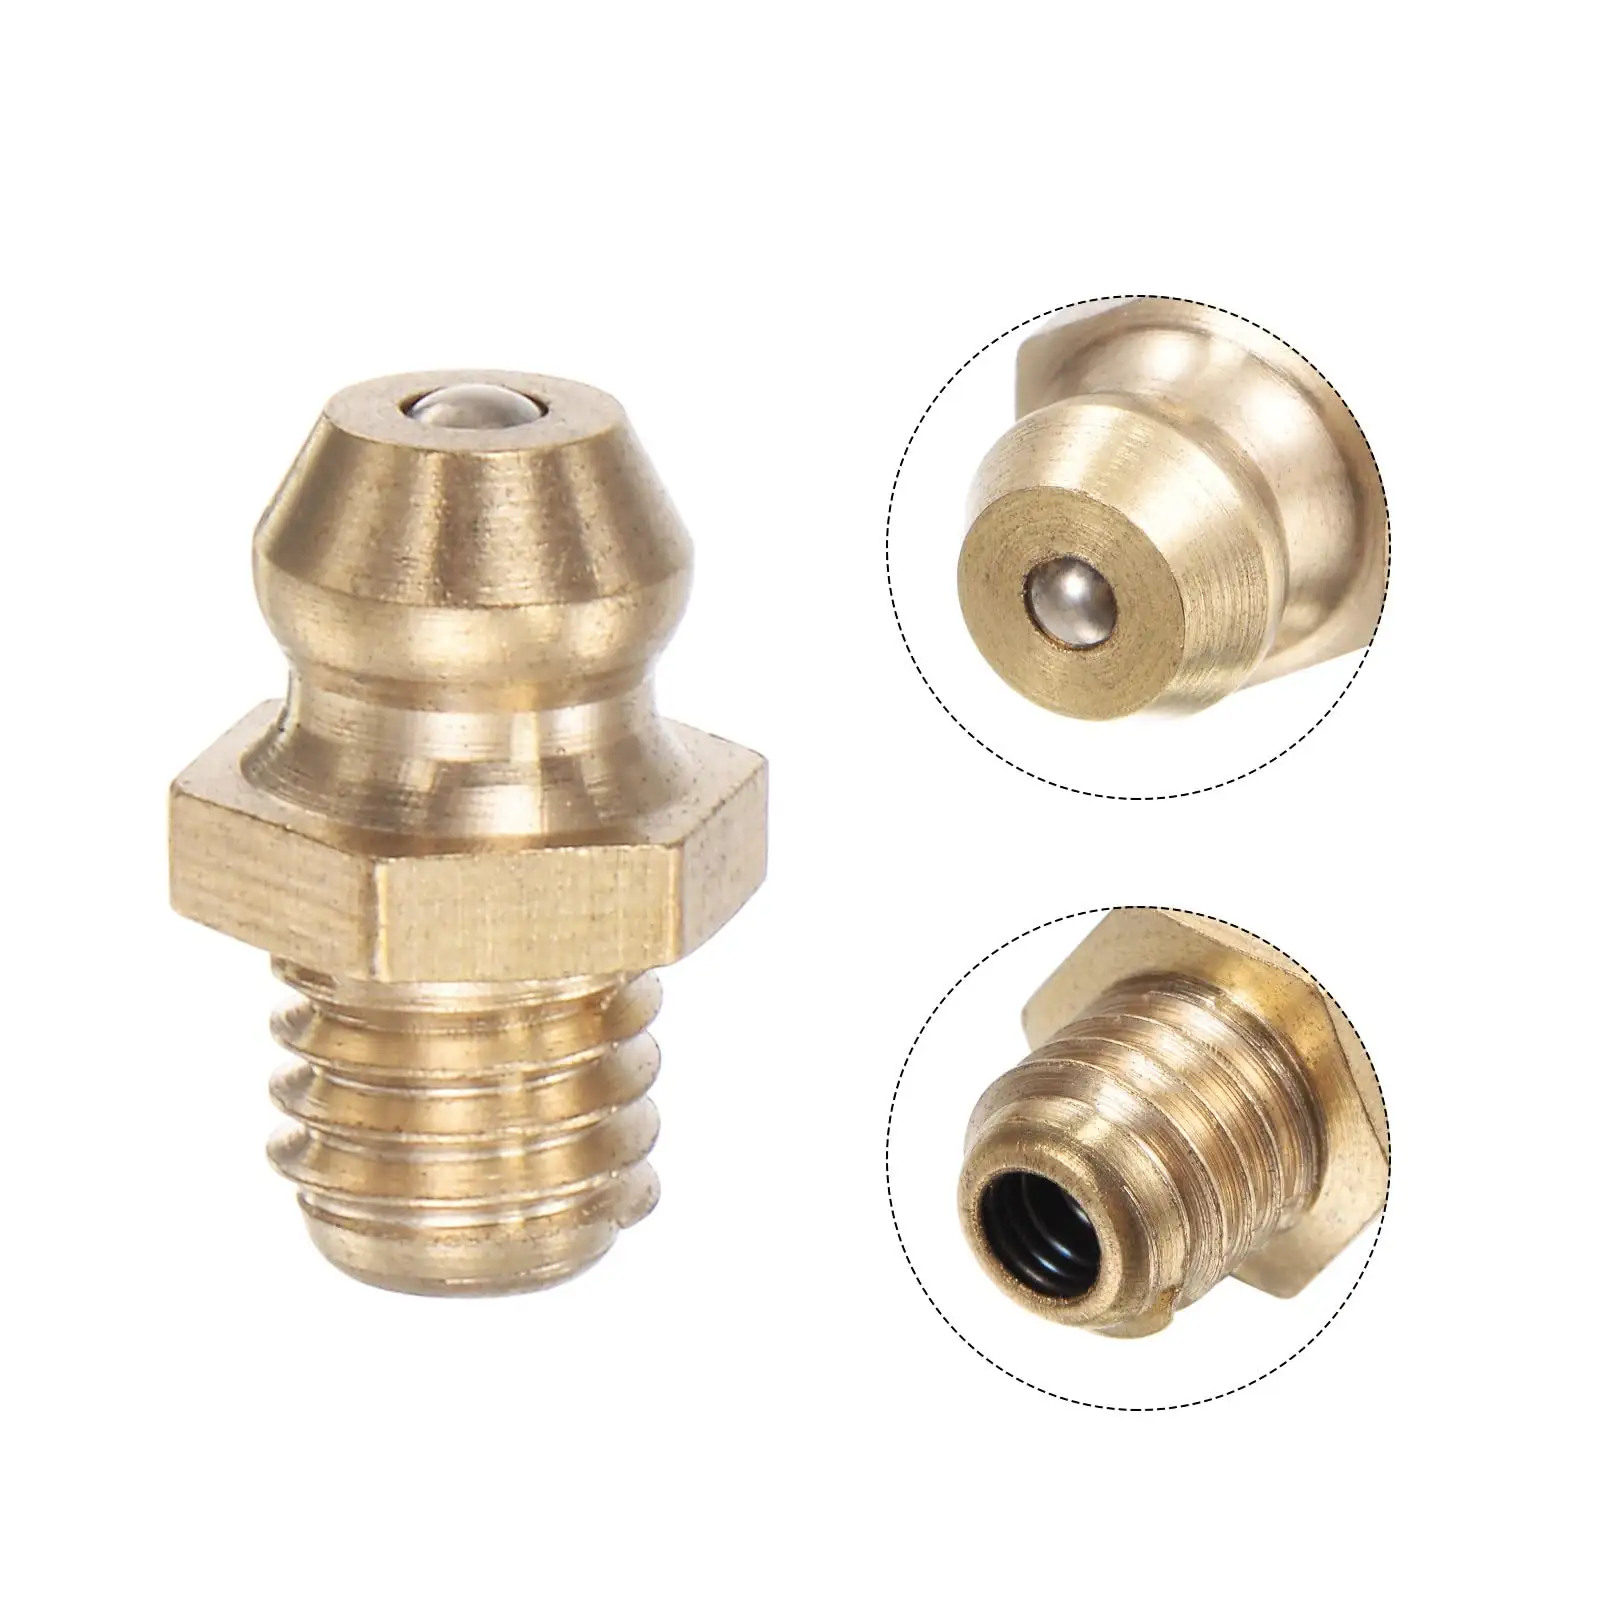 Brass Straight and Angled Grease Fitting M6x1mm Metric Thread Straight 90 Degree 45 Degree Hydraulic Grease Nipple